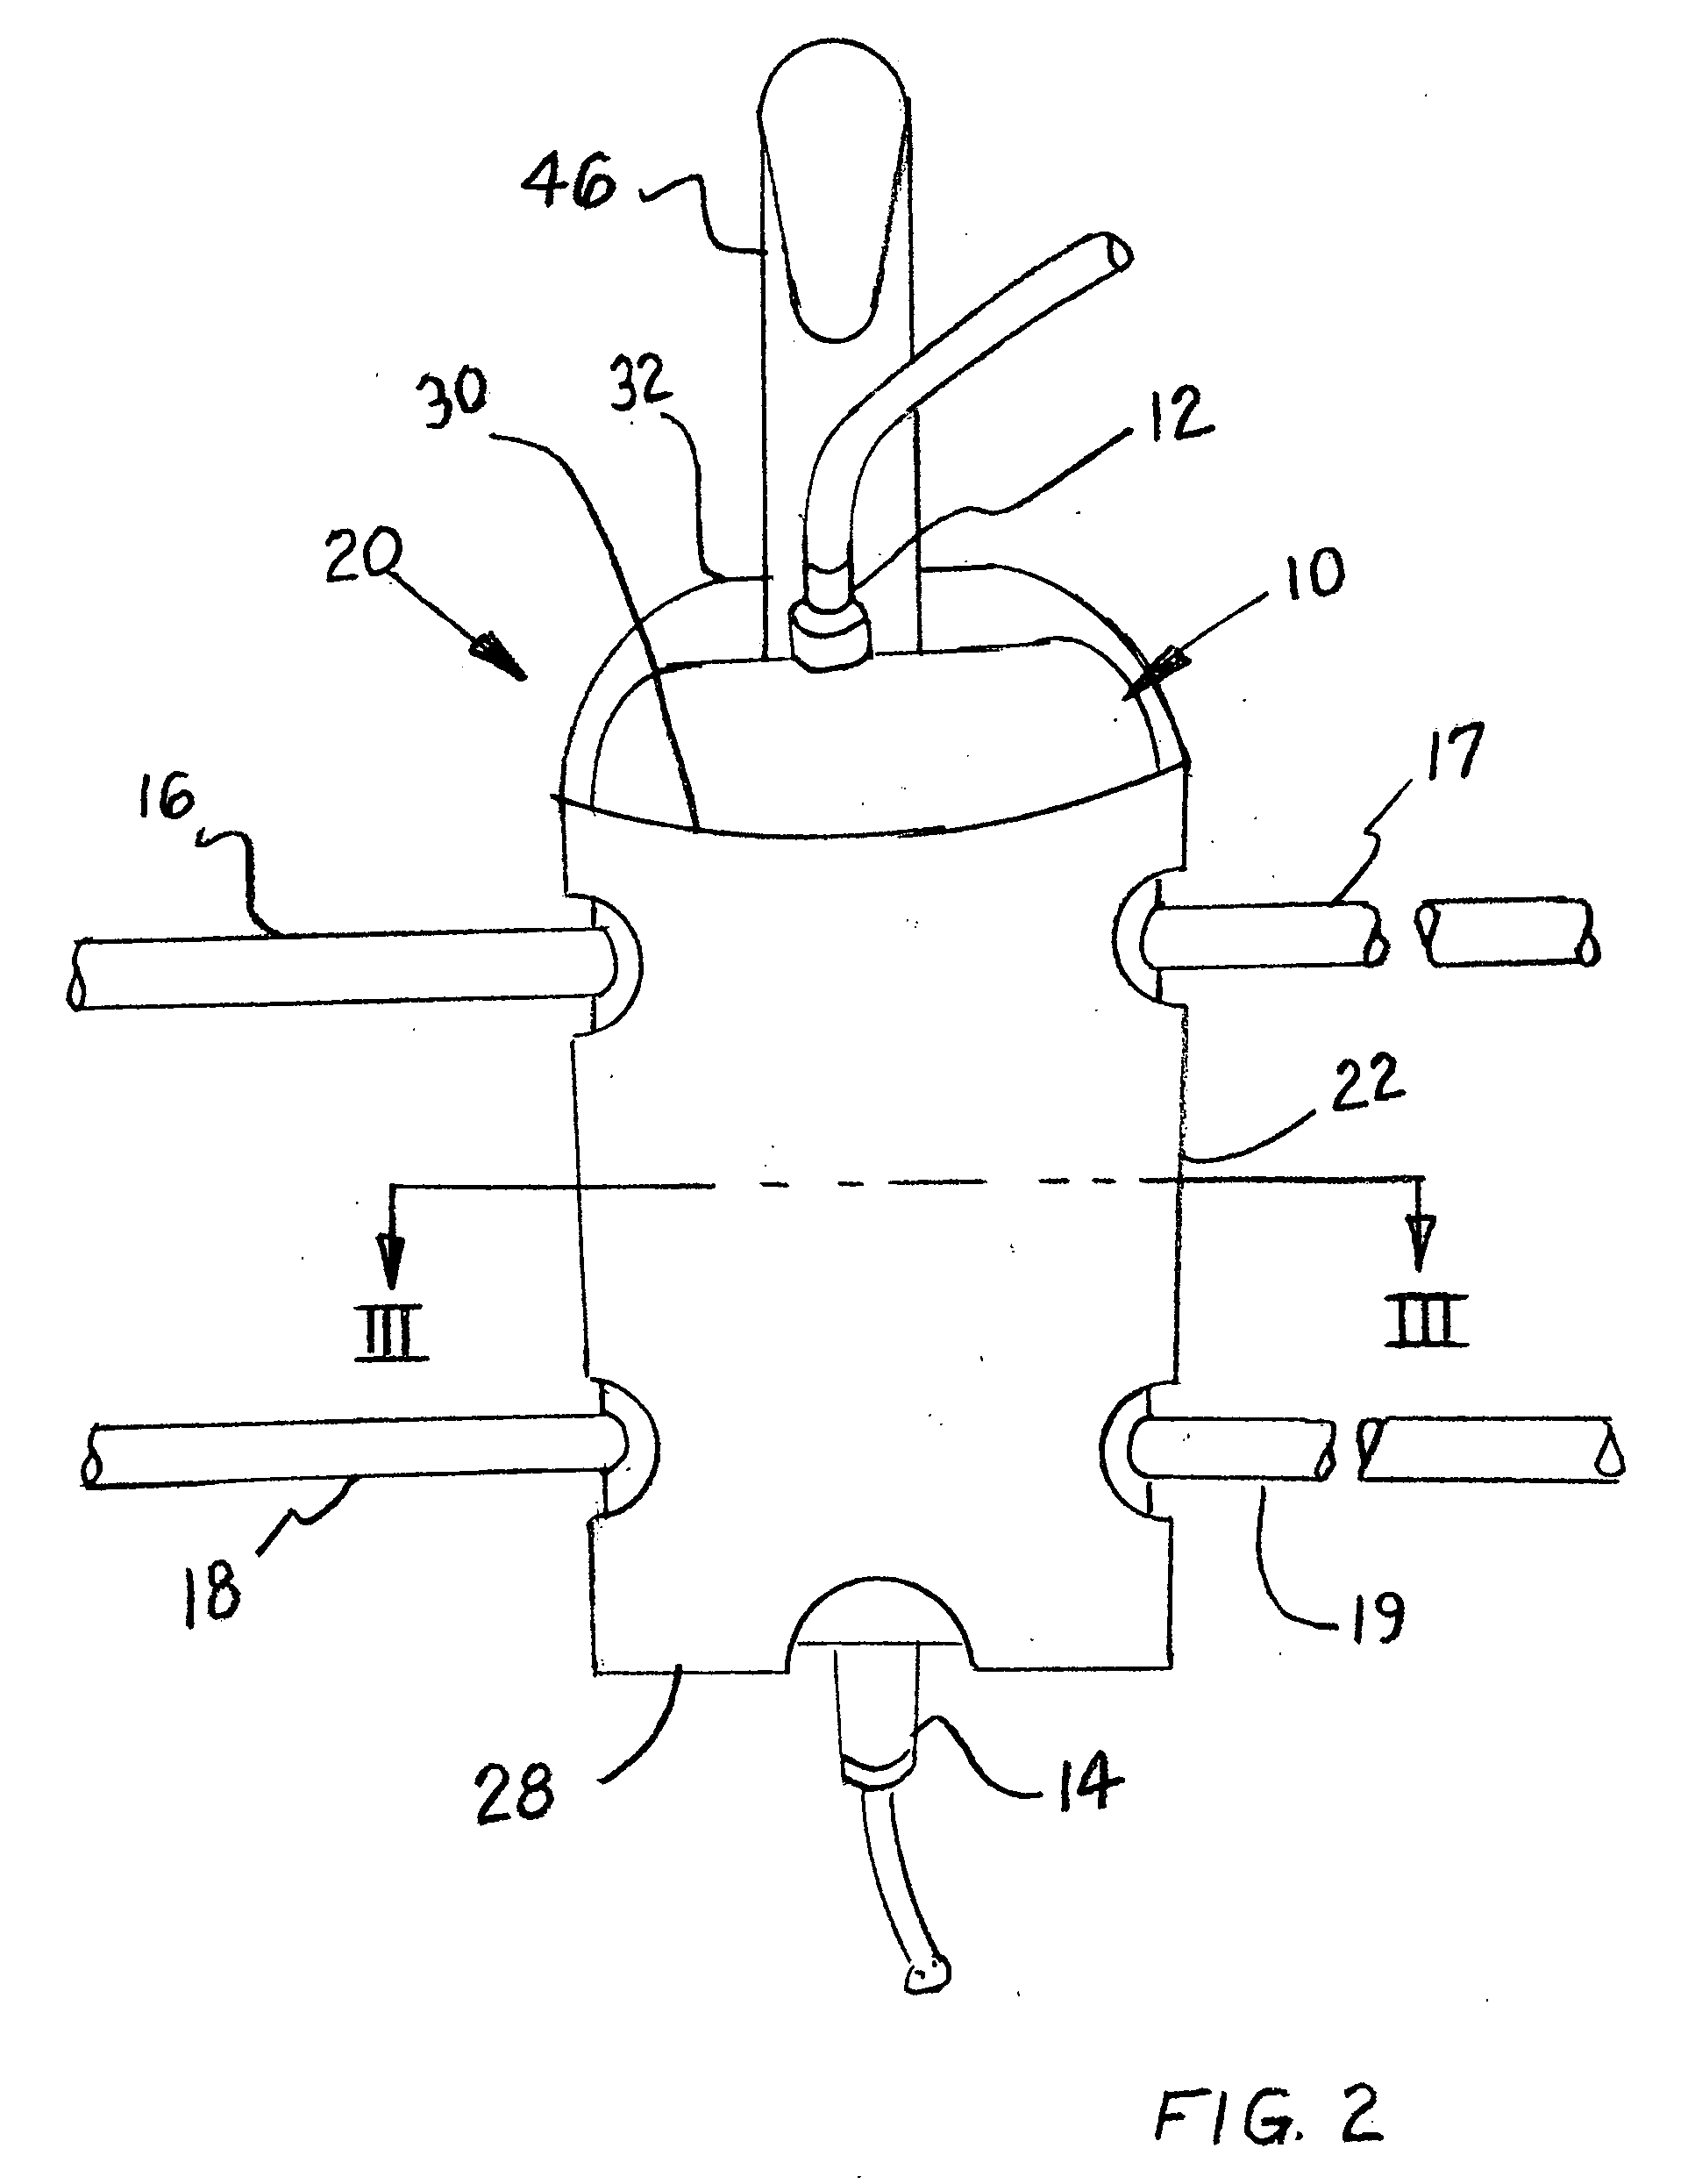 Urine collection bag supporting device